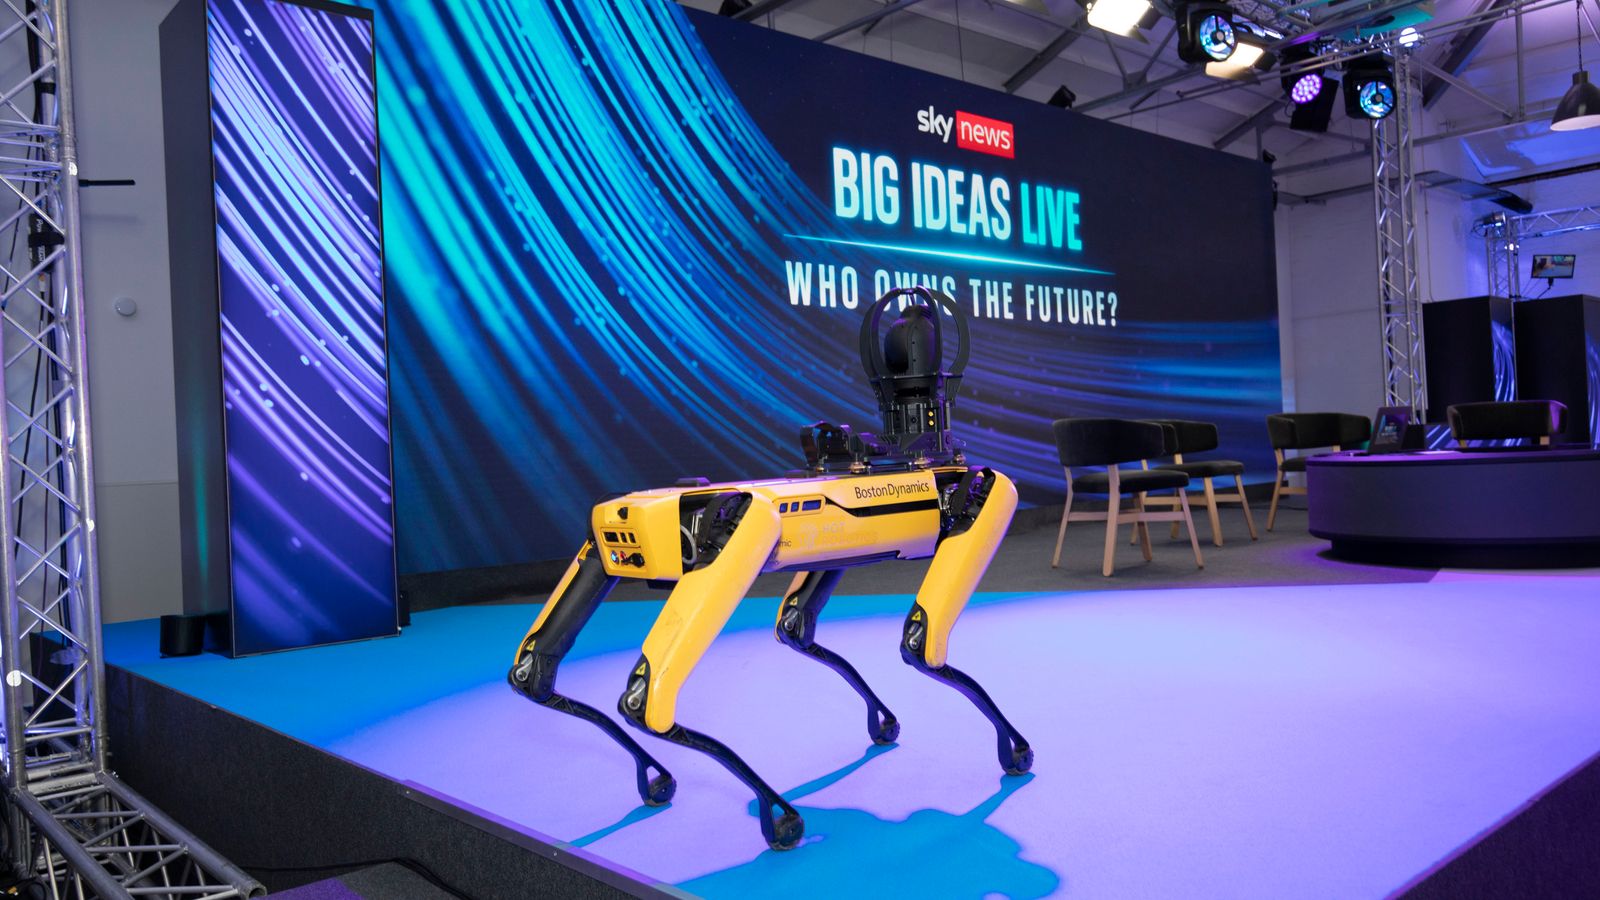 VR dating to a robot dog – Big Ideas Live in pictures